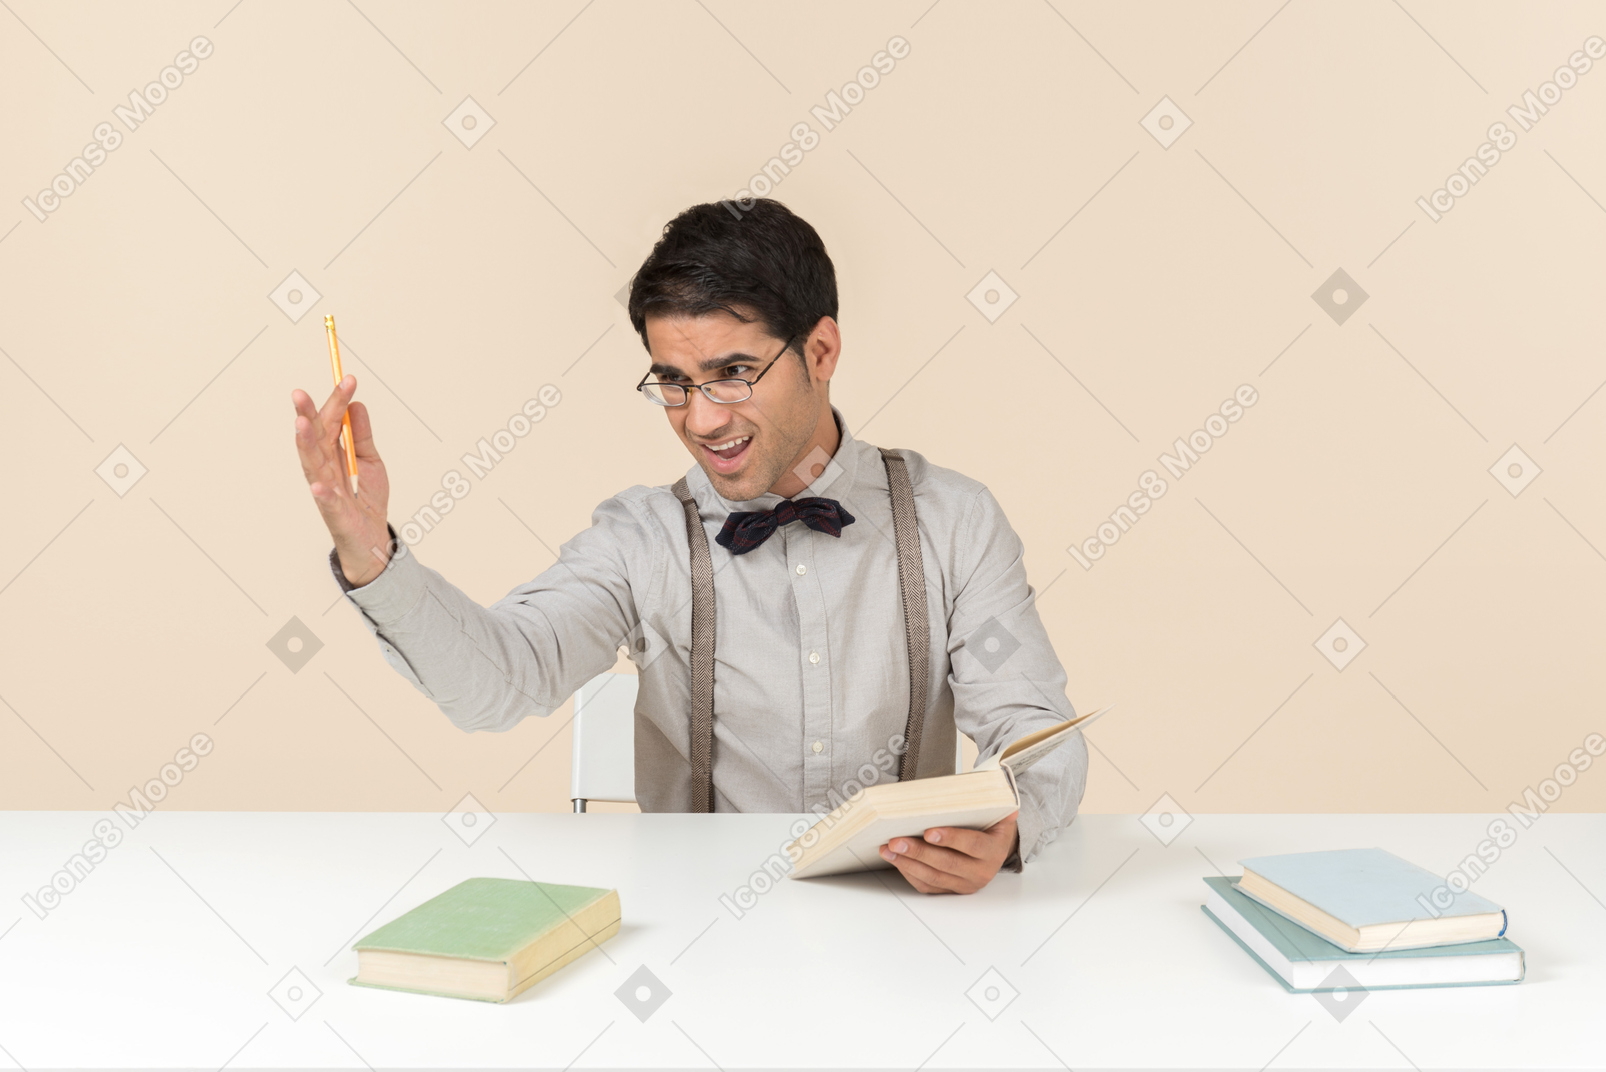 Professor sitting at the table and reading books